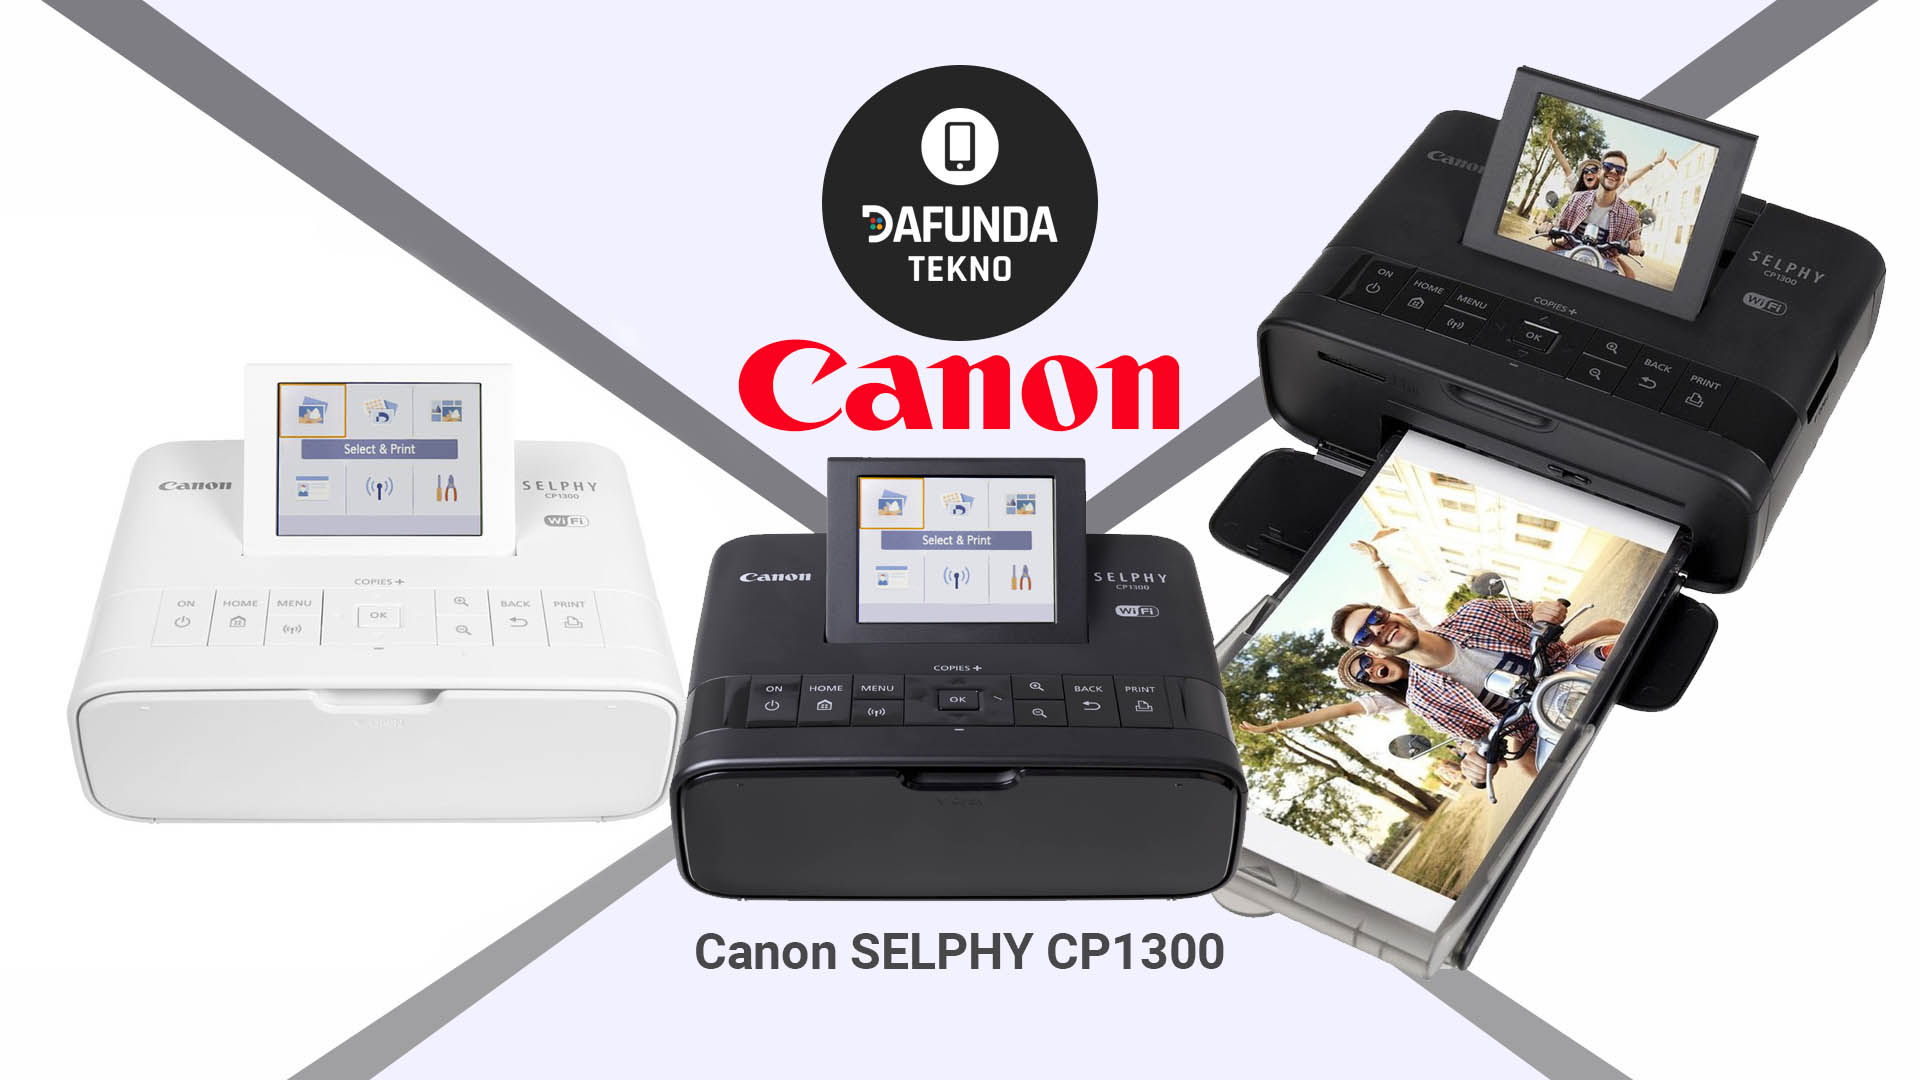 Canon Selphy Cp1300